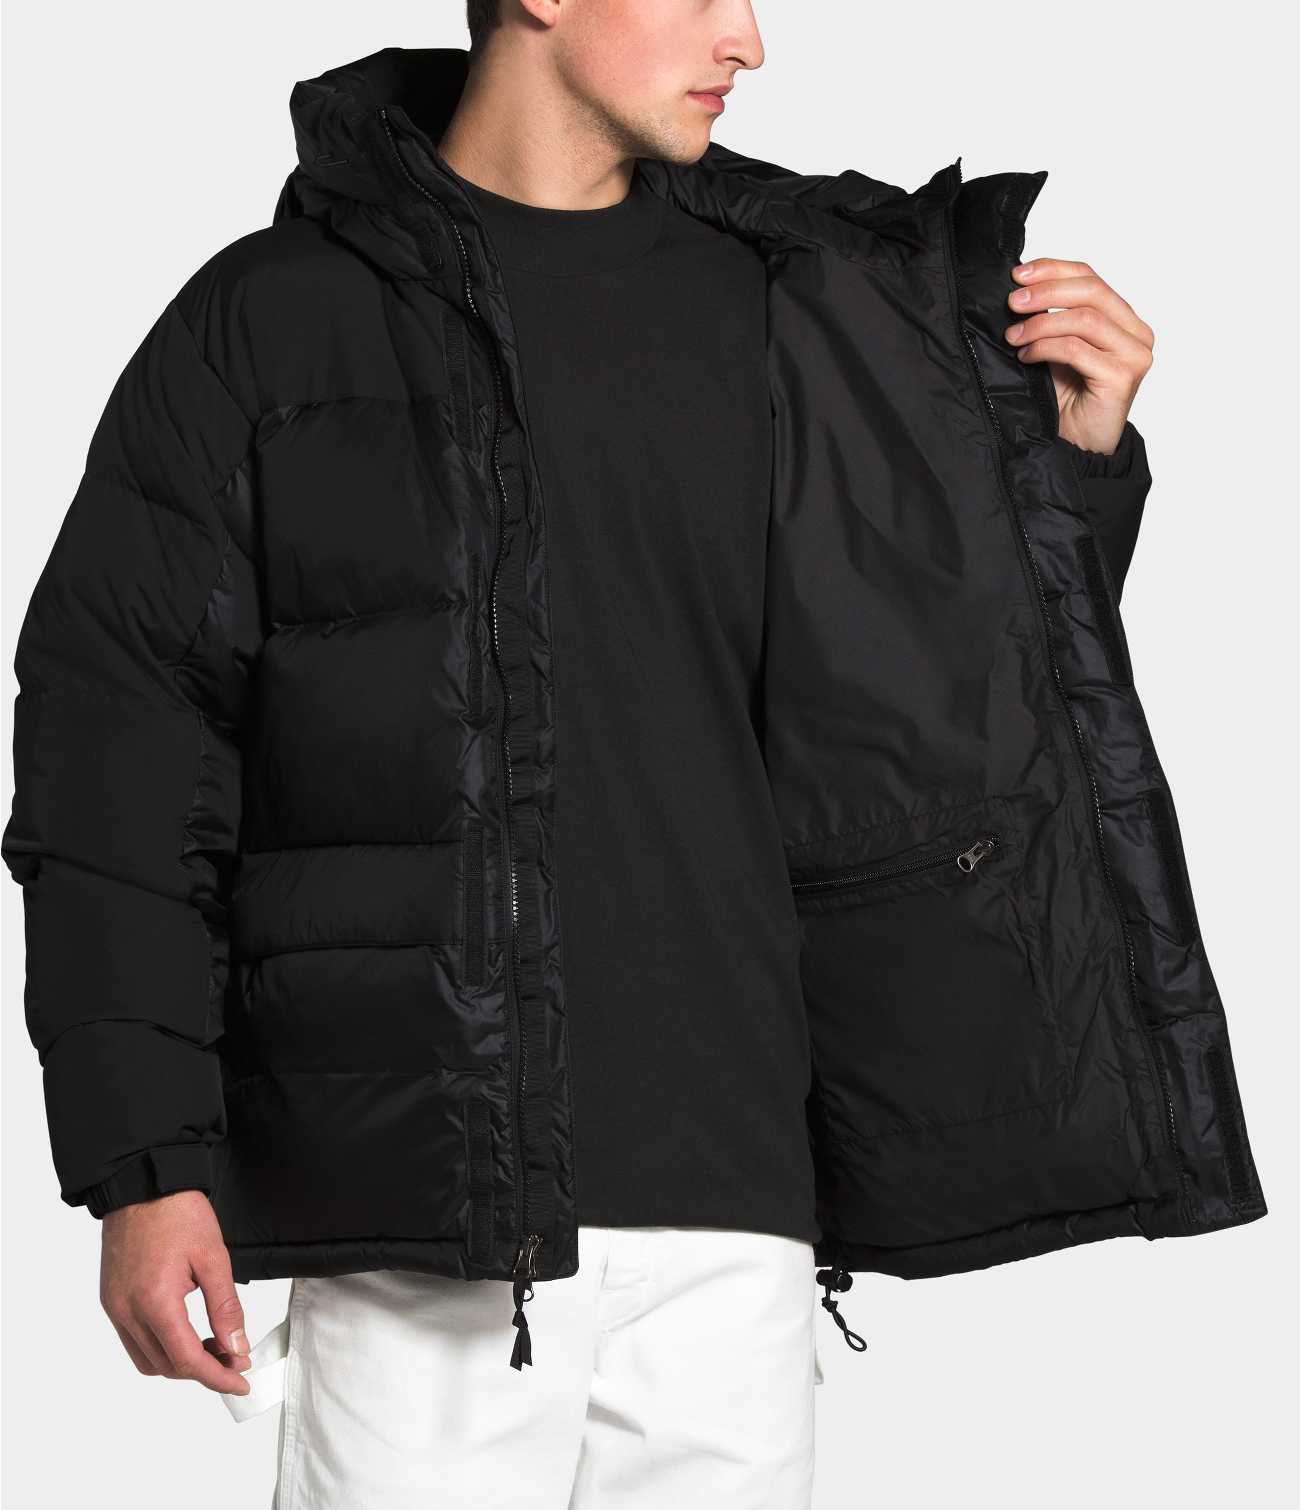 The North Face Renewed - MEN'S HMLYN DOWN PARKA